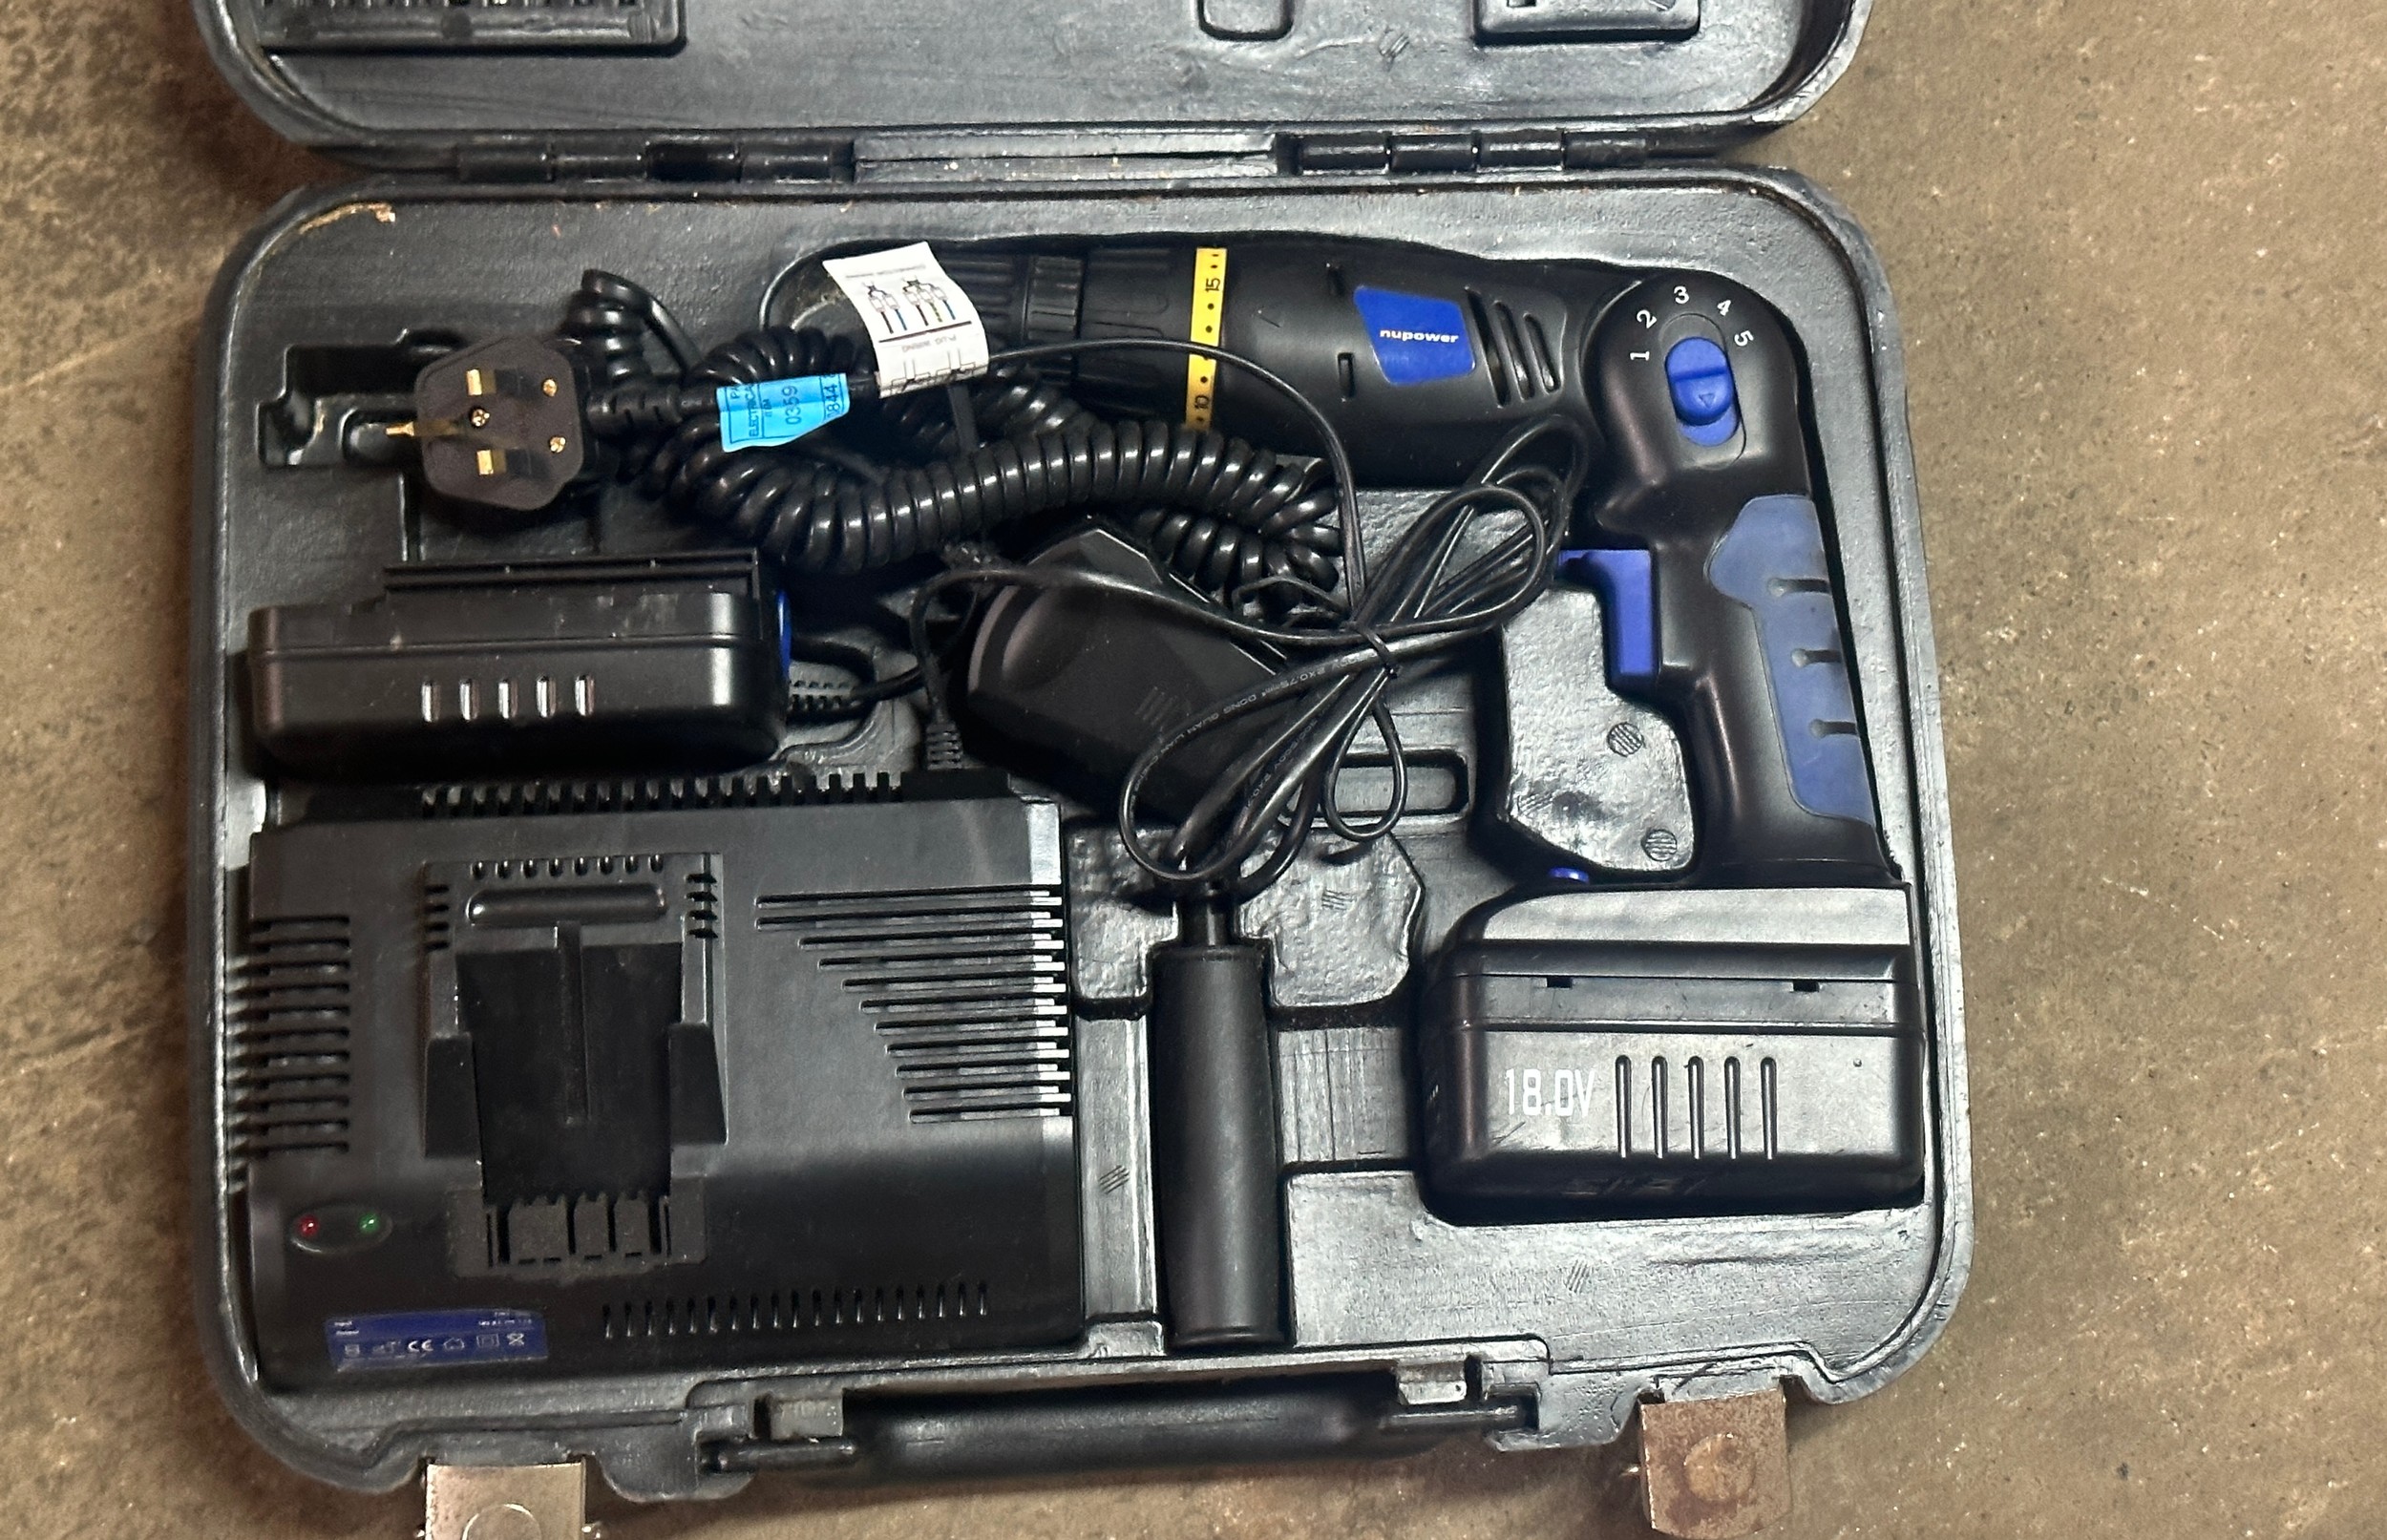 18 v Nu power drill - in working order - Image 2 of 3